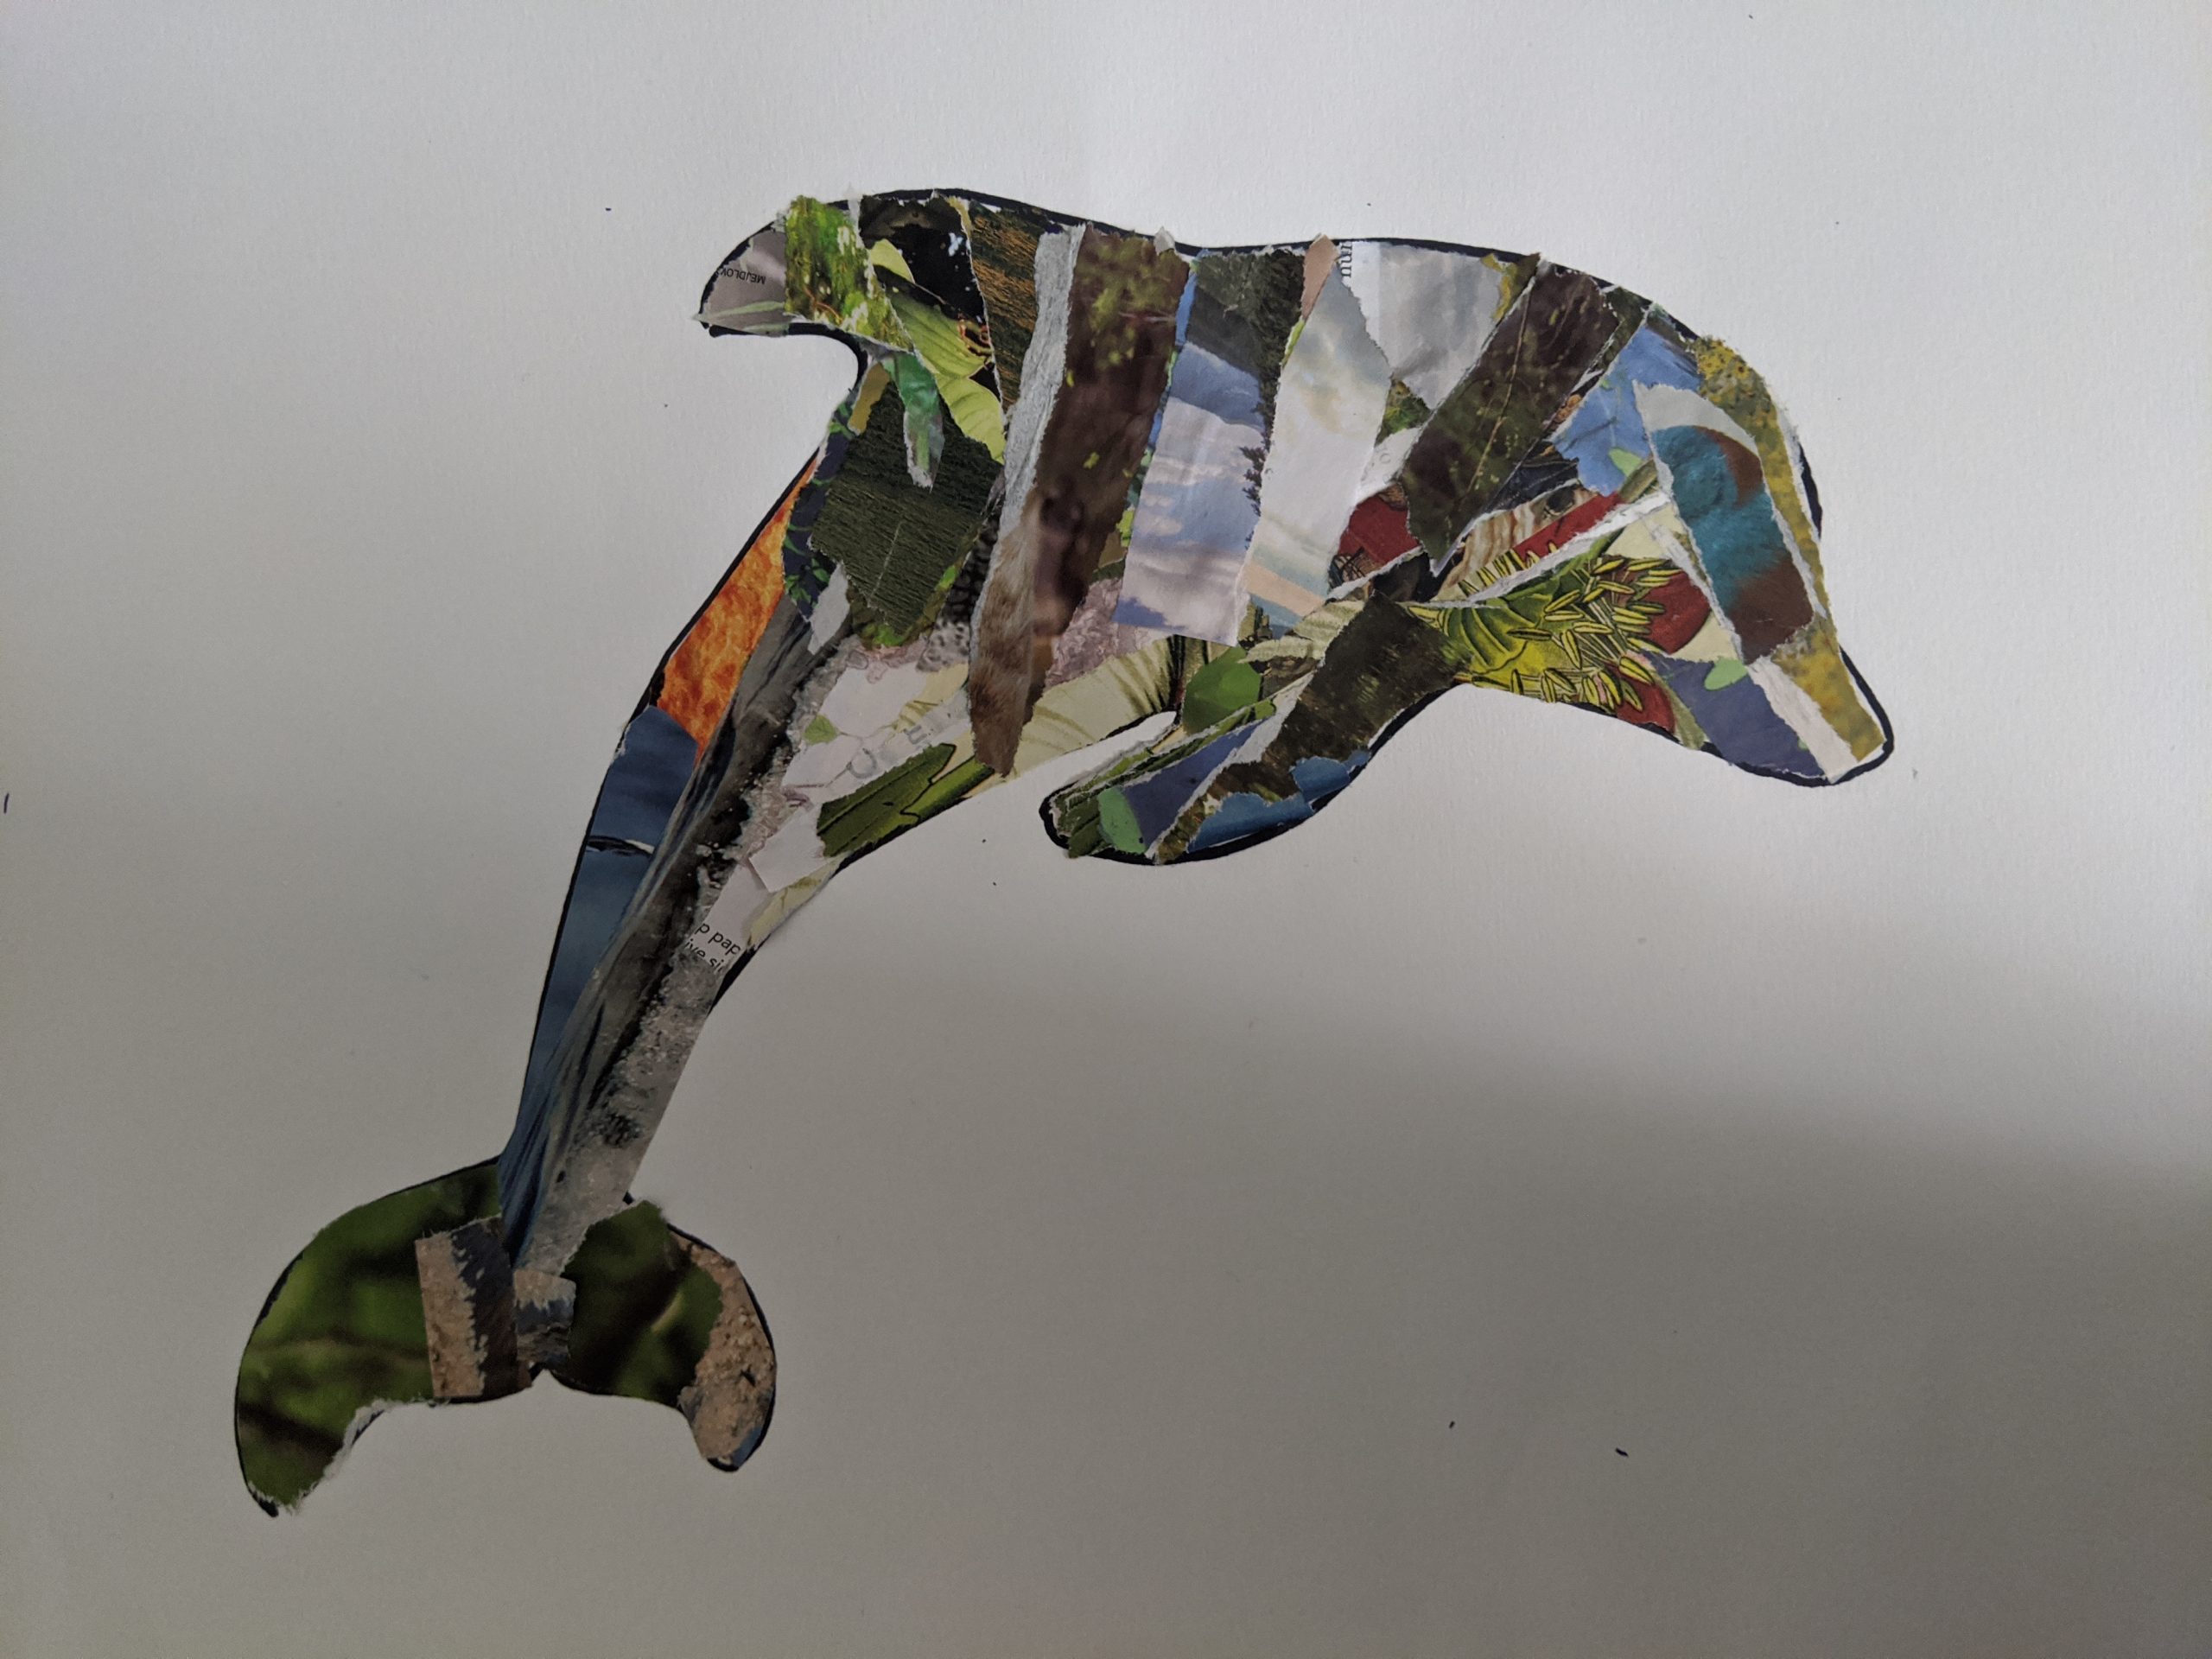 Art Activity | Endangered Animal Collages – Halsey Institute of  Contemporary Art